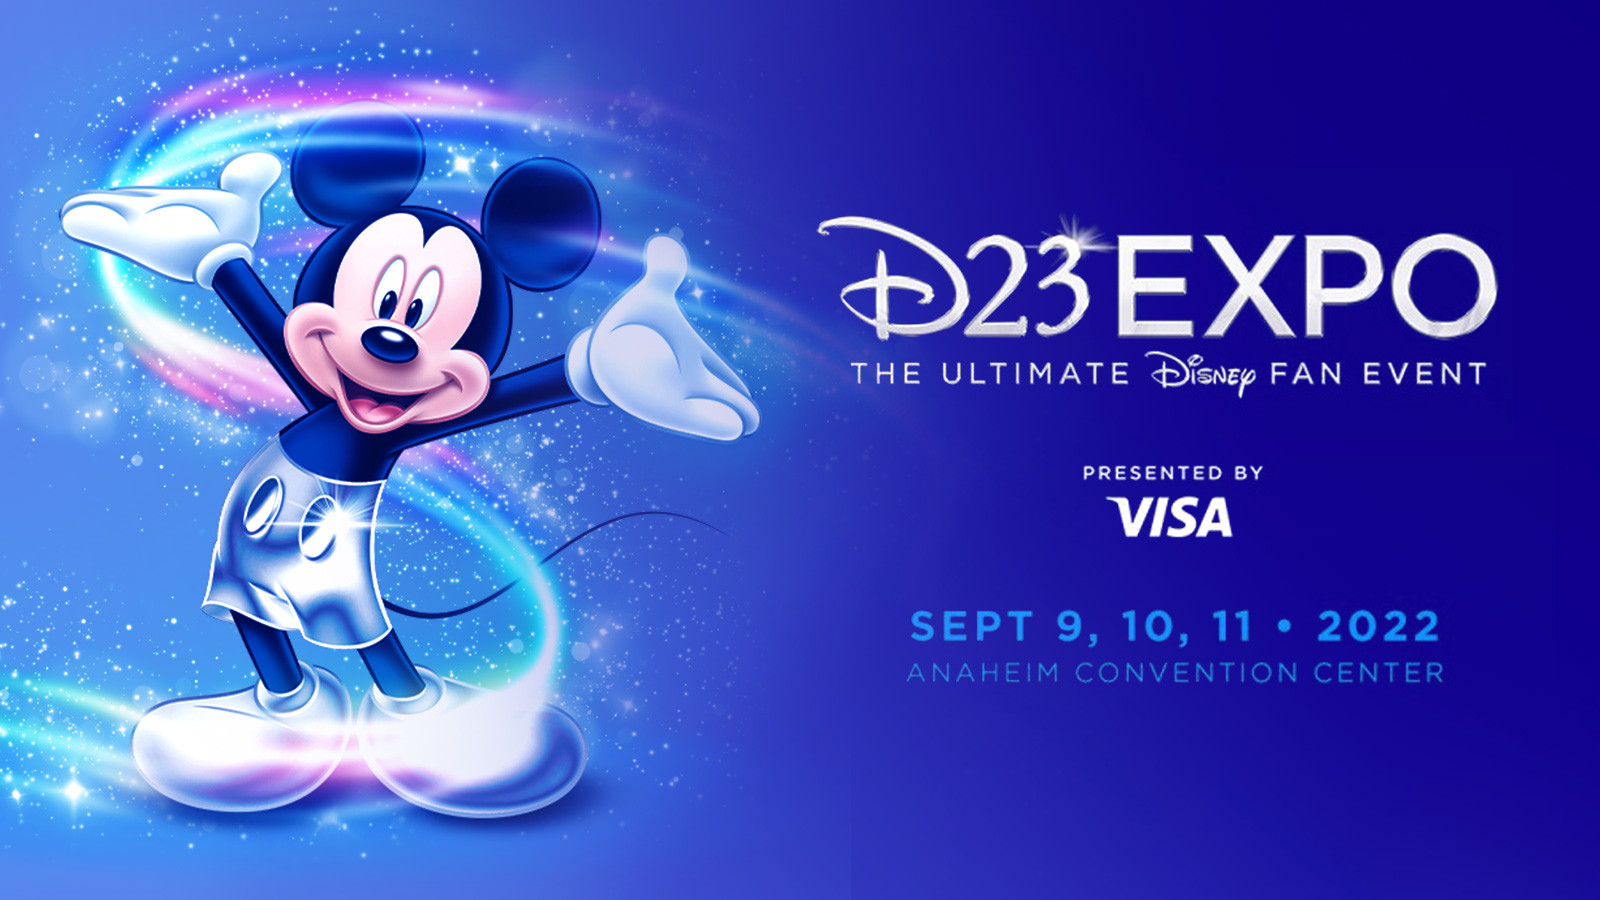 Floor Plan Released For D23 Expo 2022 Which Kicks Off On Sept 9